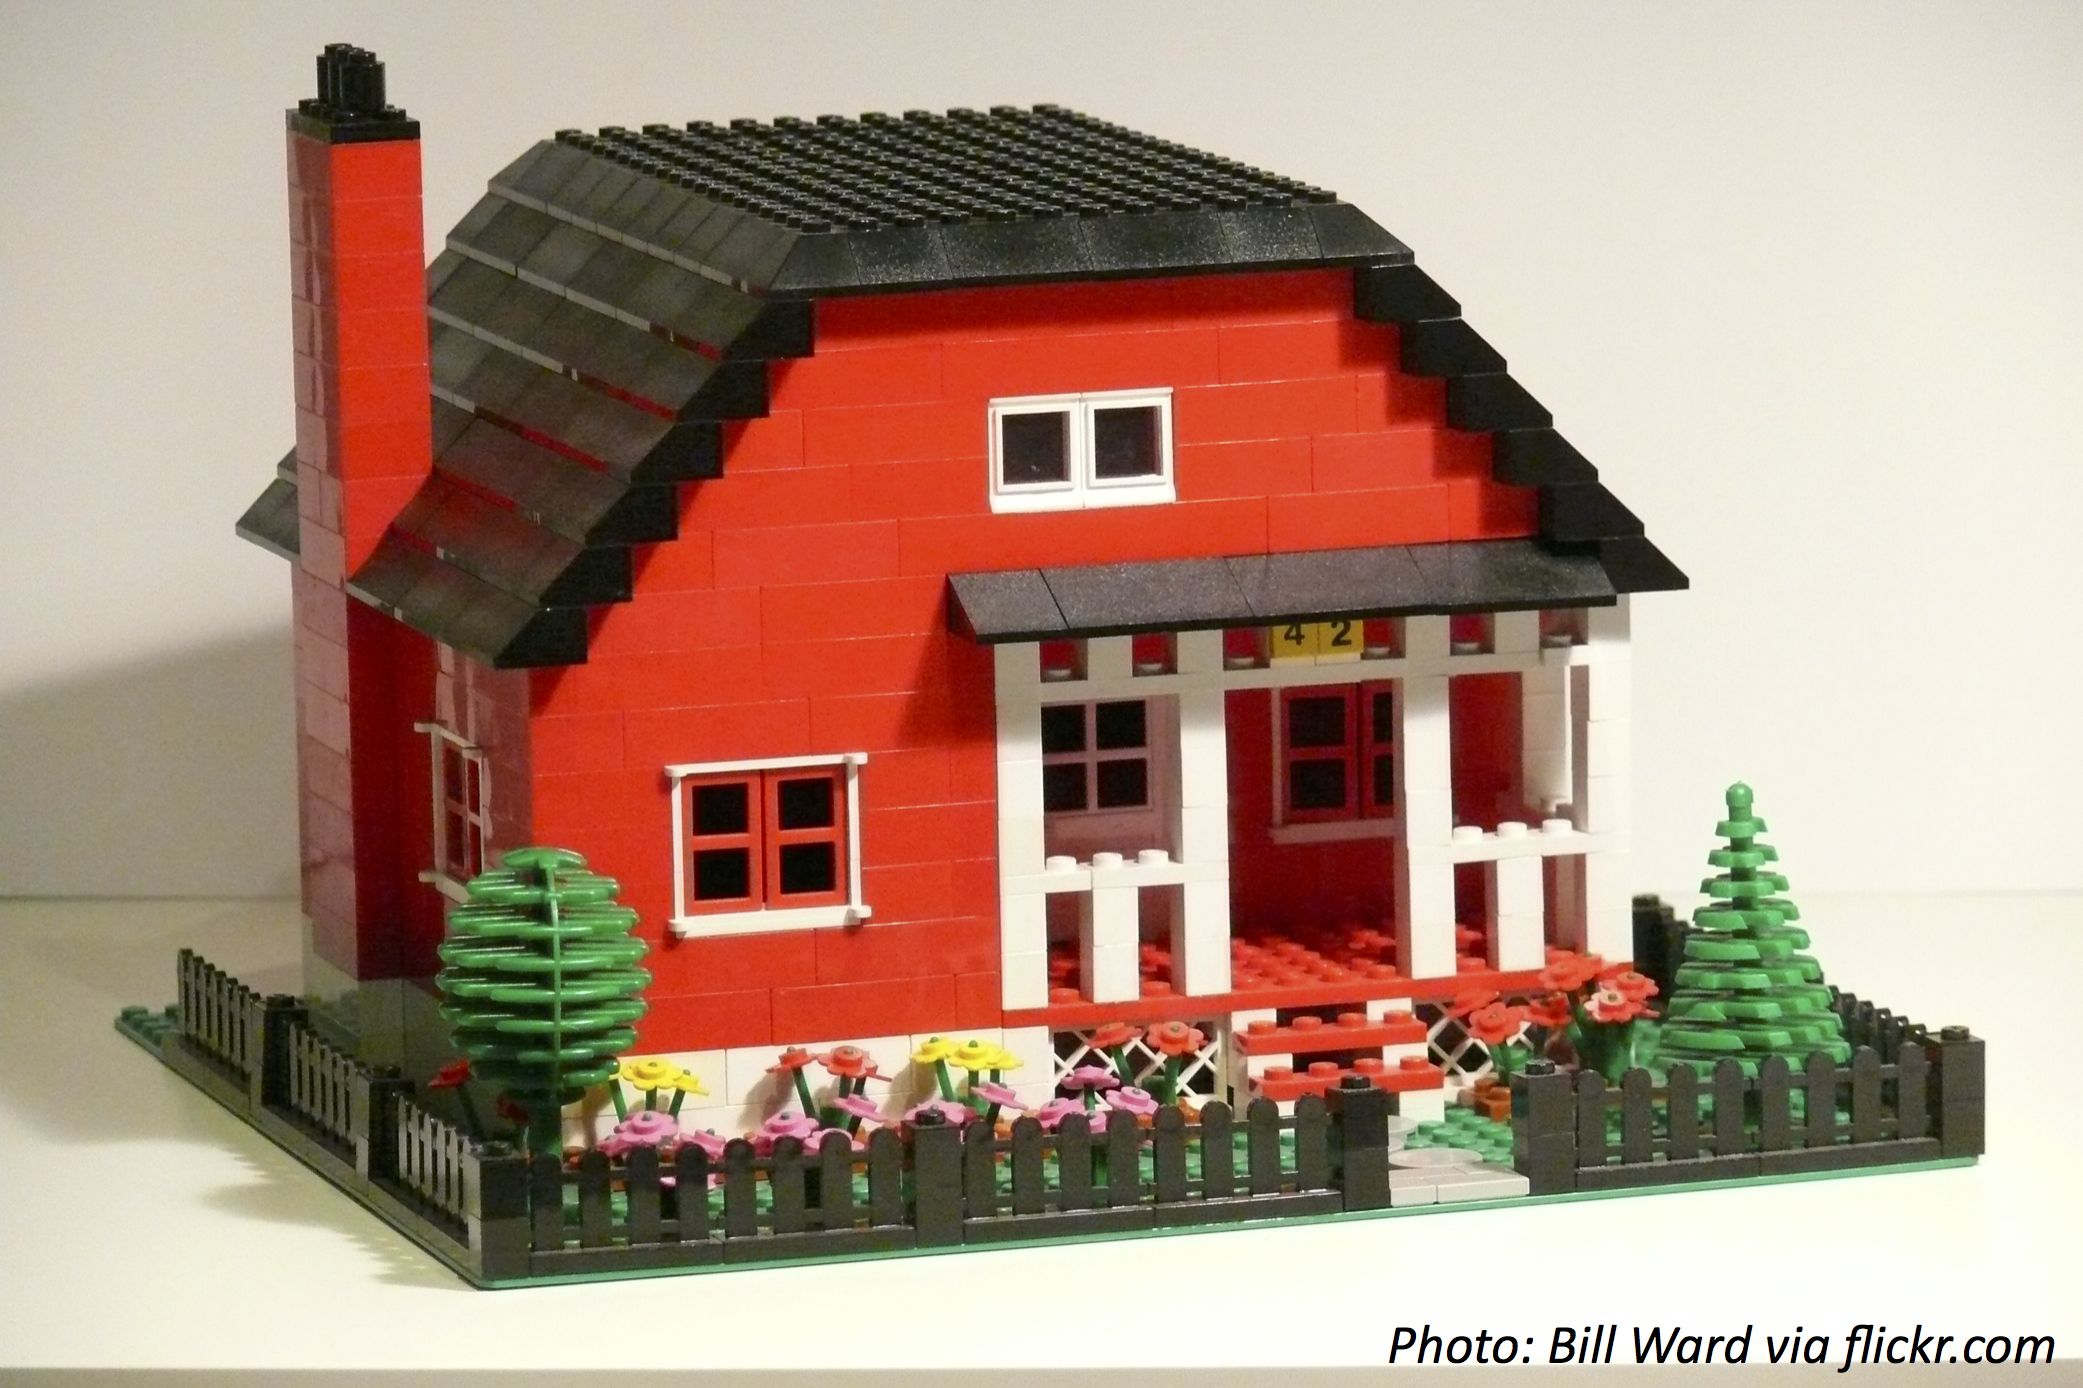 Your House, Made of Lego